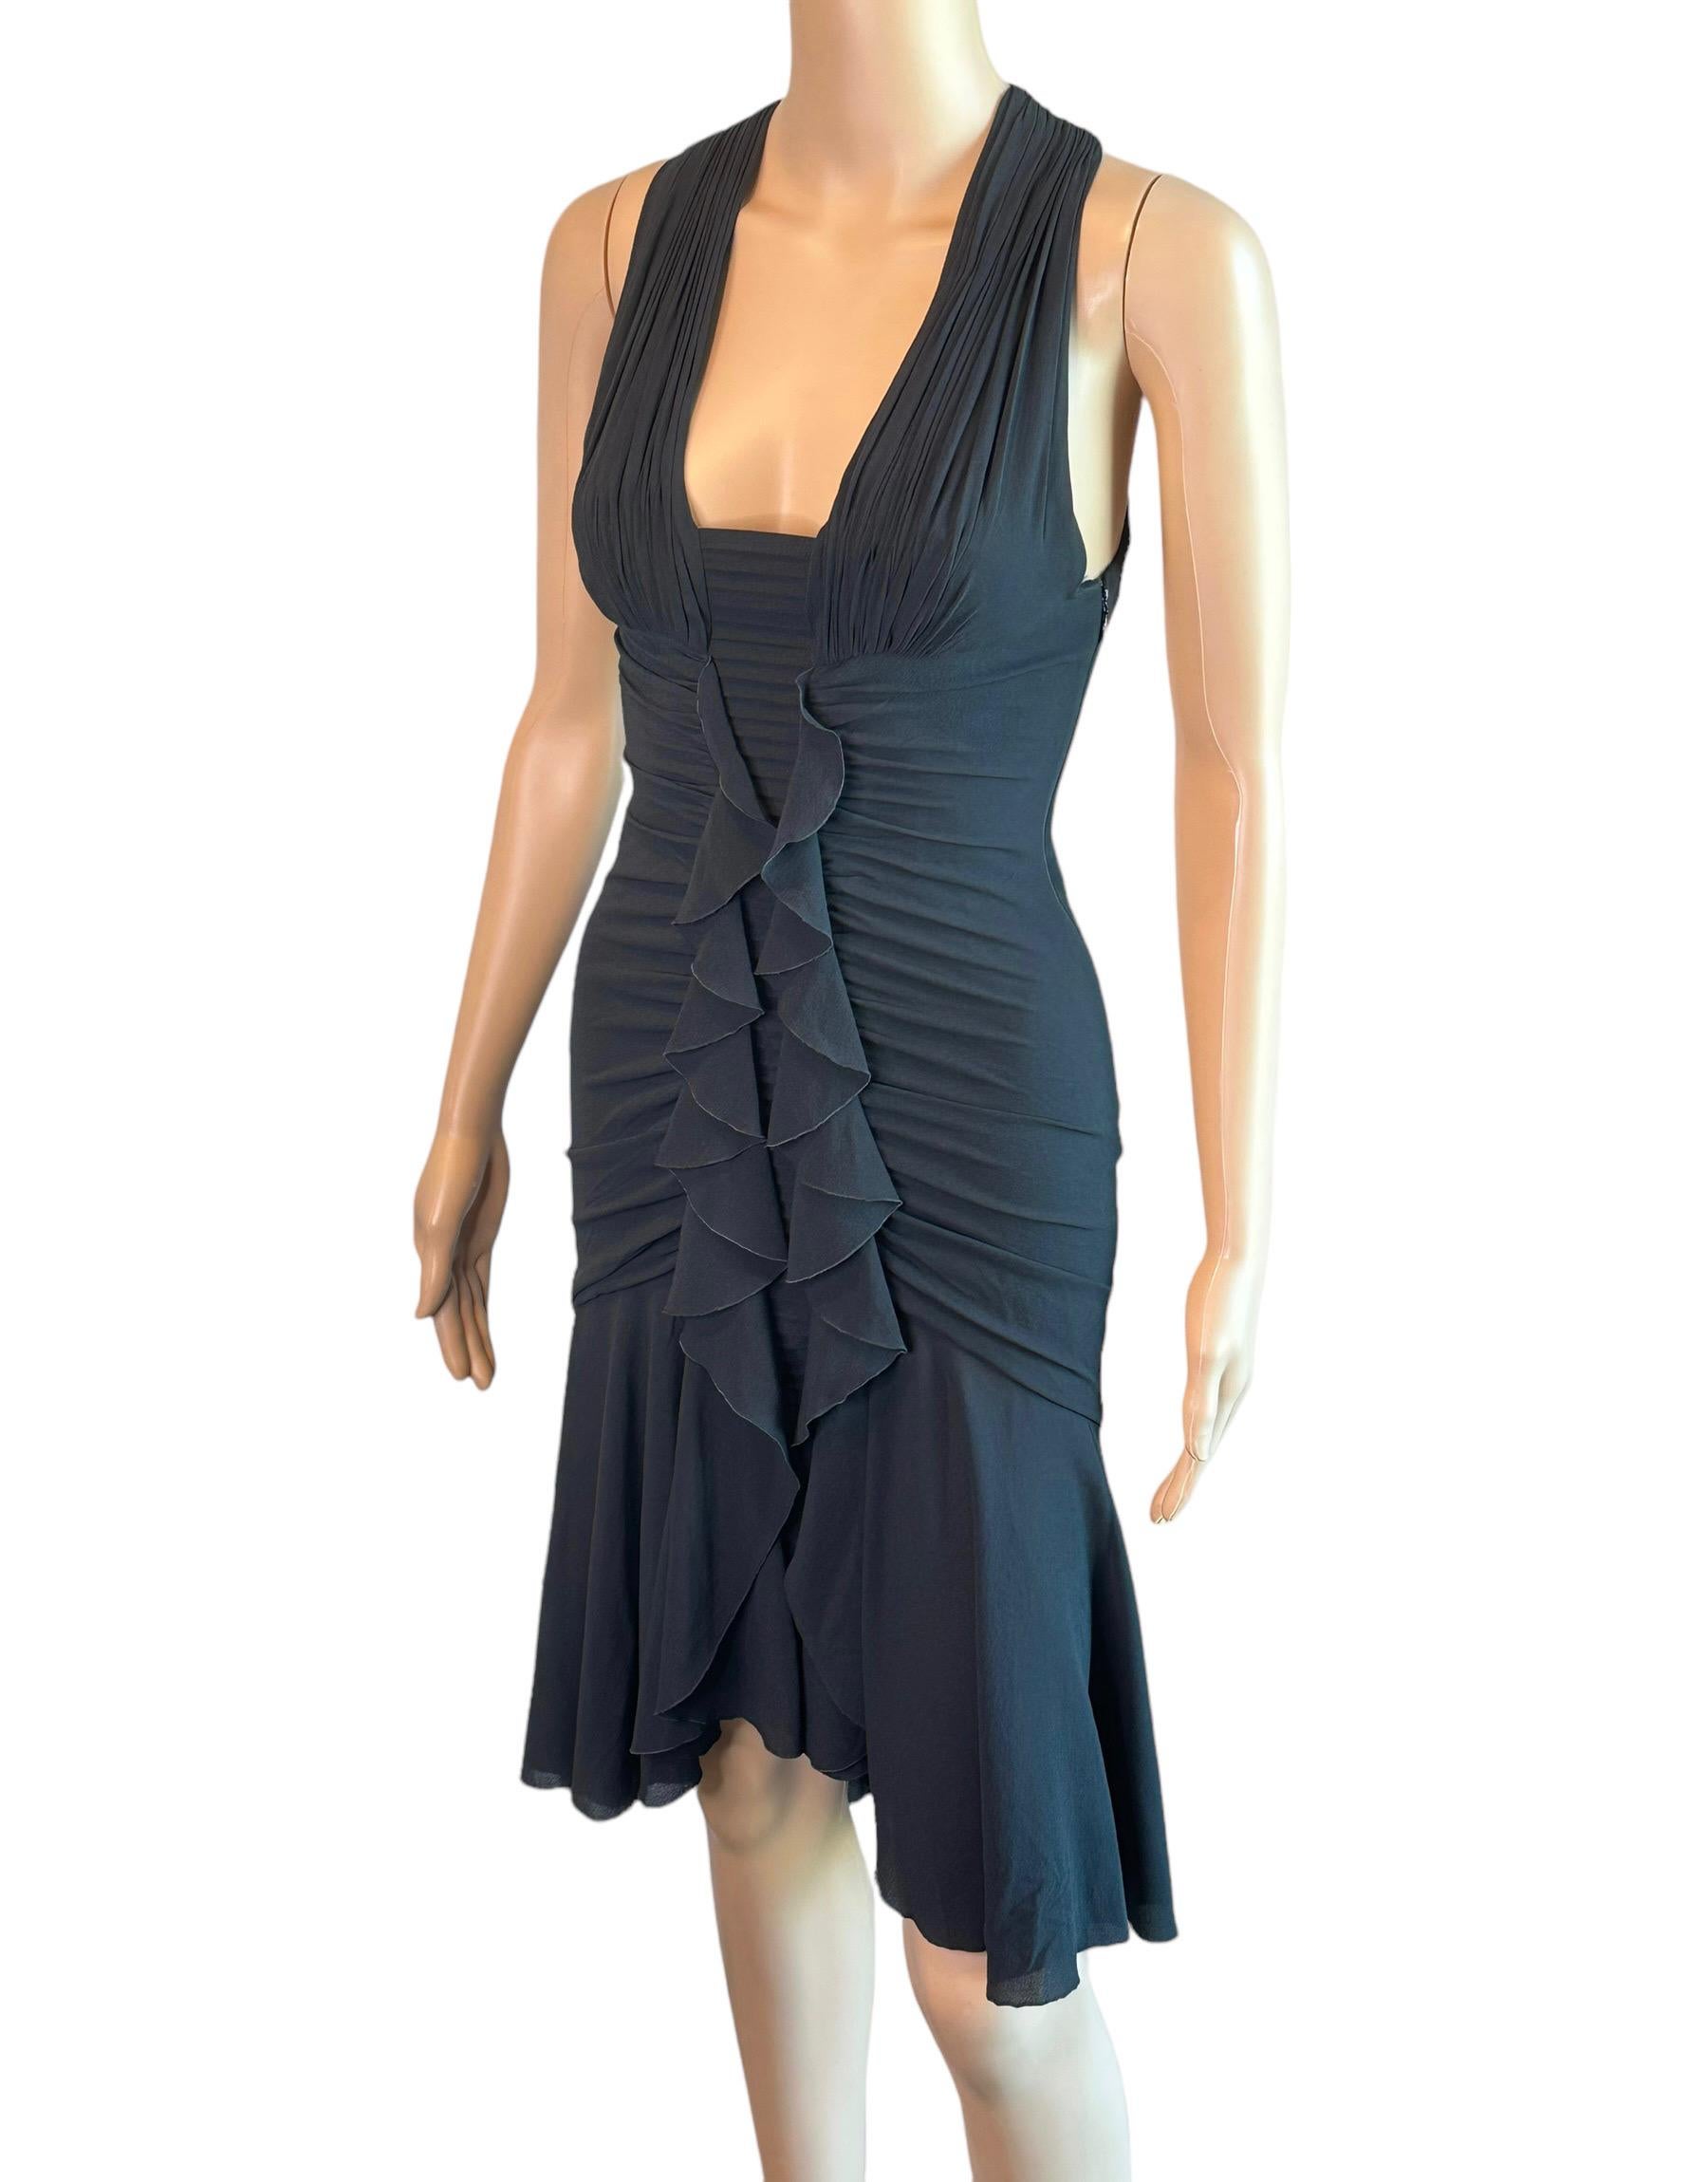 Versace F/W 2006 Plunging Ruched Ruffles Black Dress For Sale 5